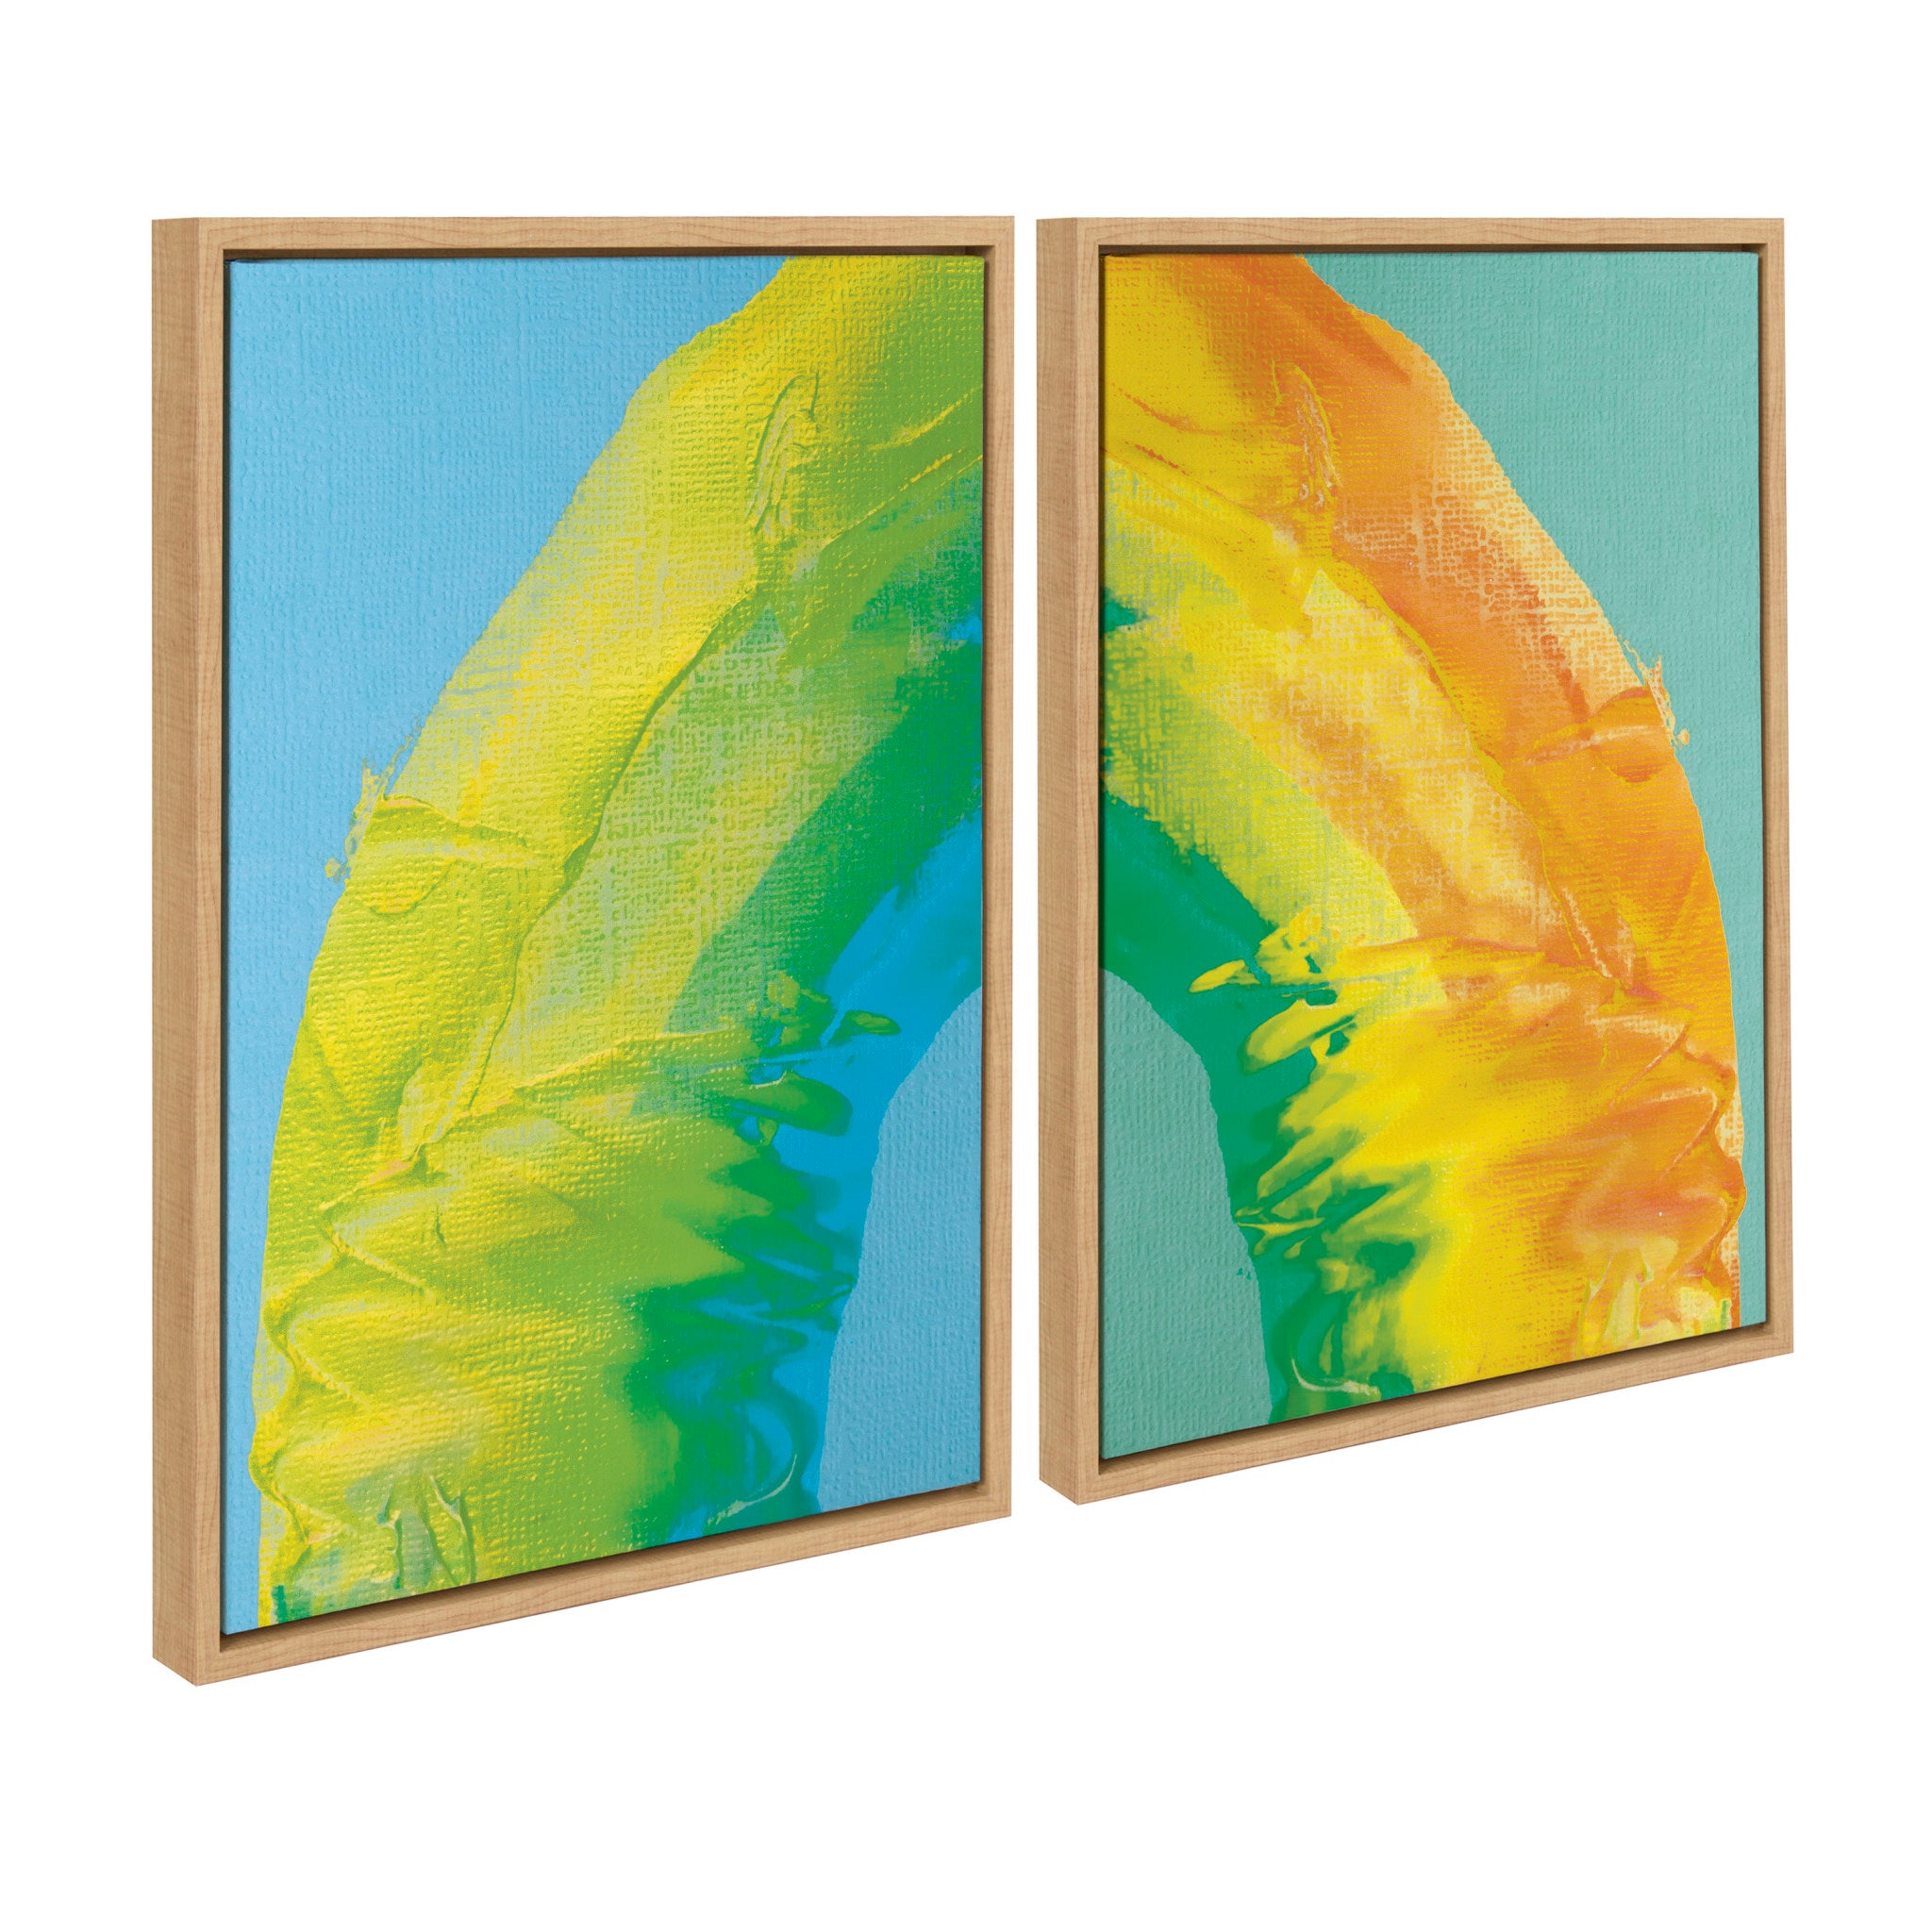 Sylvie MP Rainbow Sorbet 1 and 2 Framed Canvas Set by Mentoring Positives